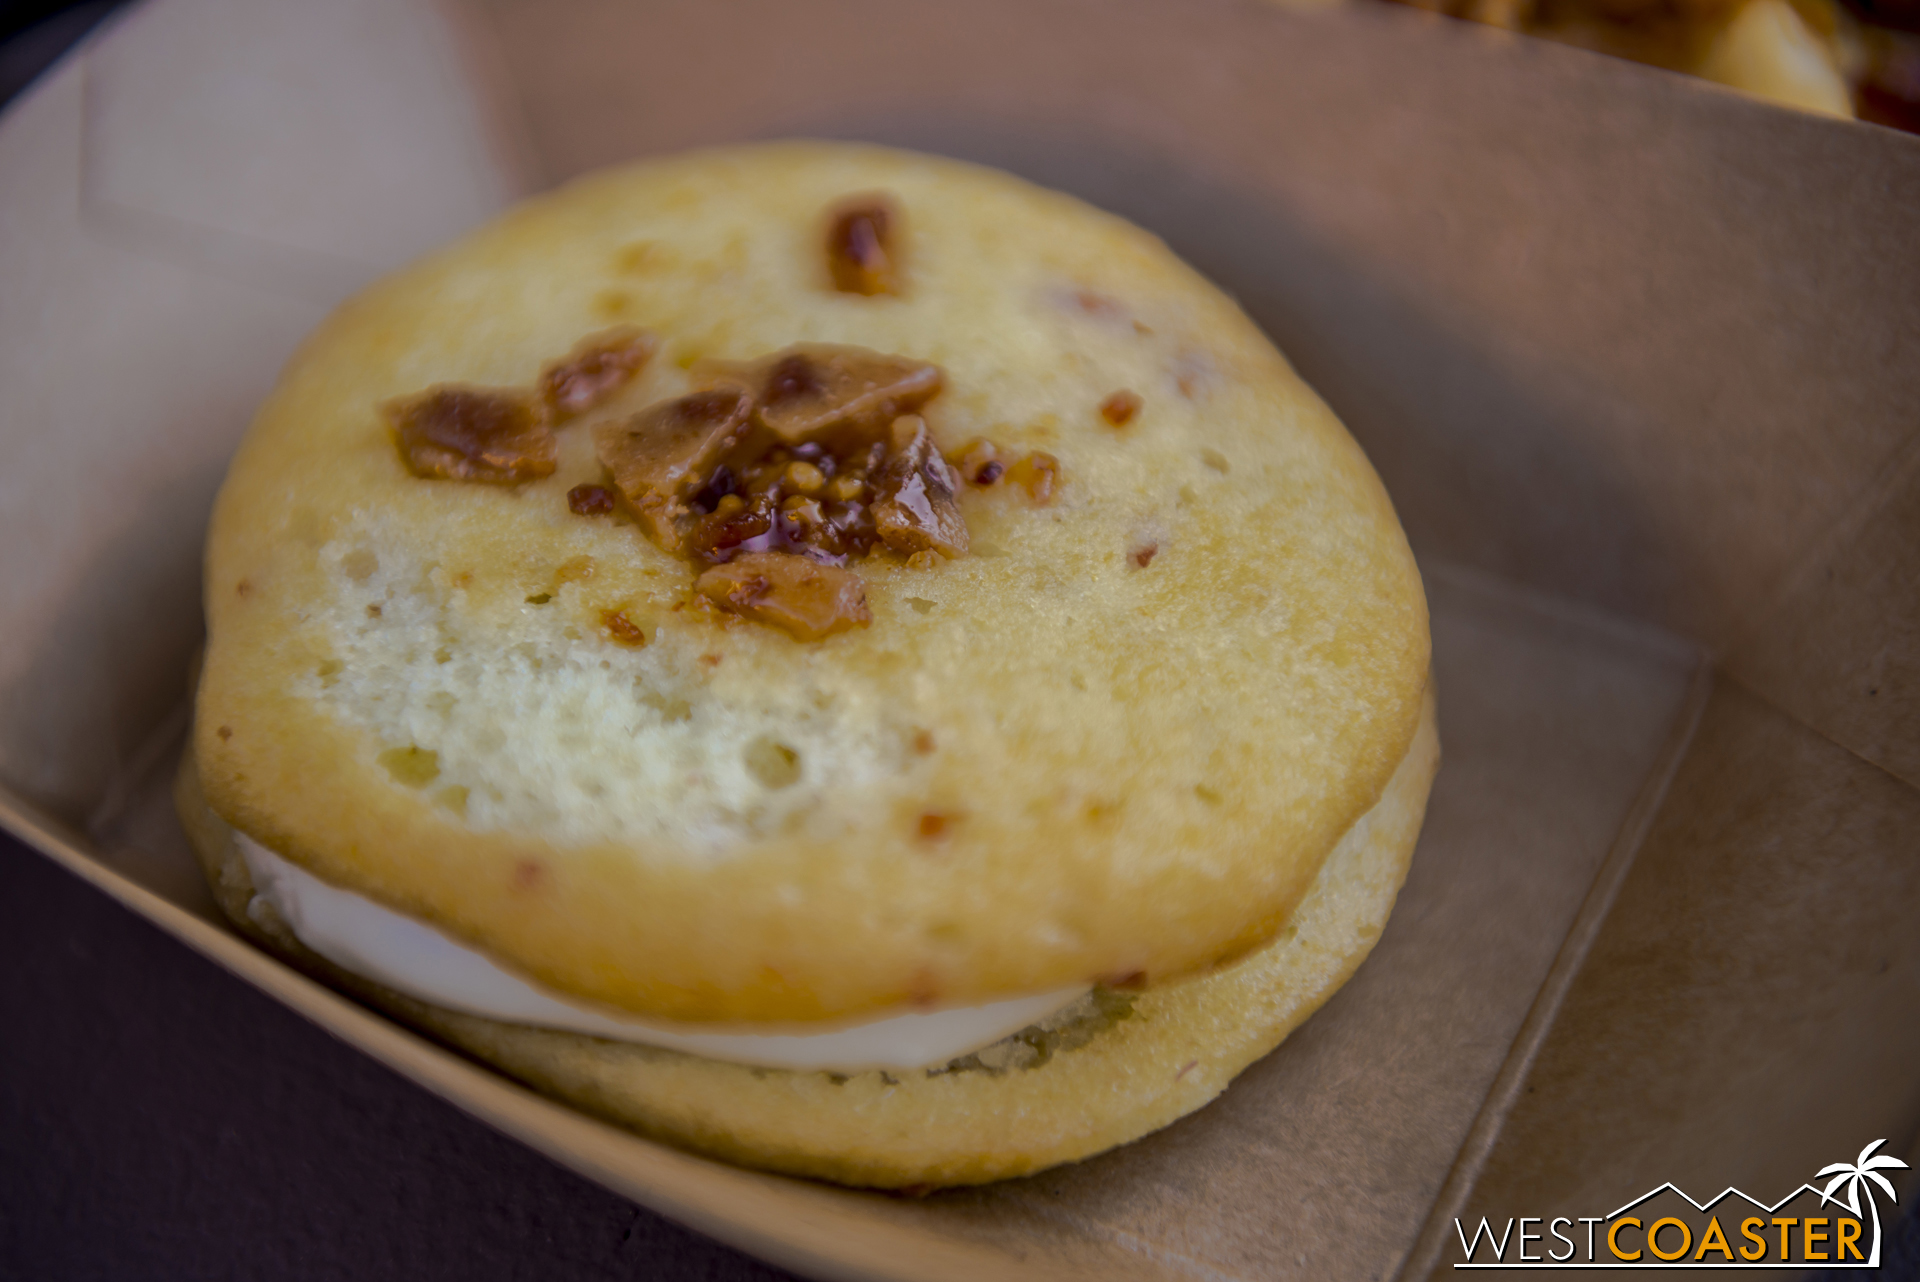  From Bacon Twist:  Maple-Bacon Whoopie Pie   ($4.25) 